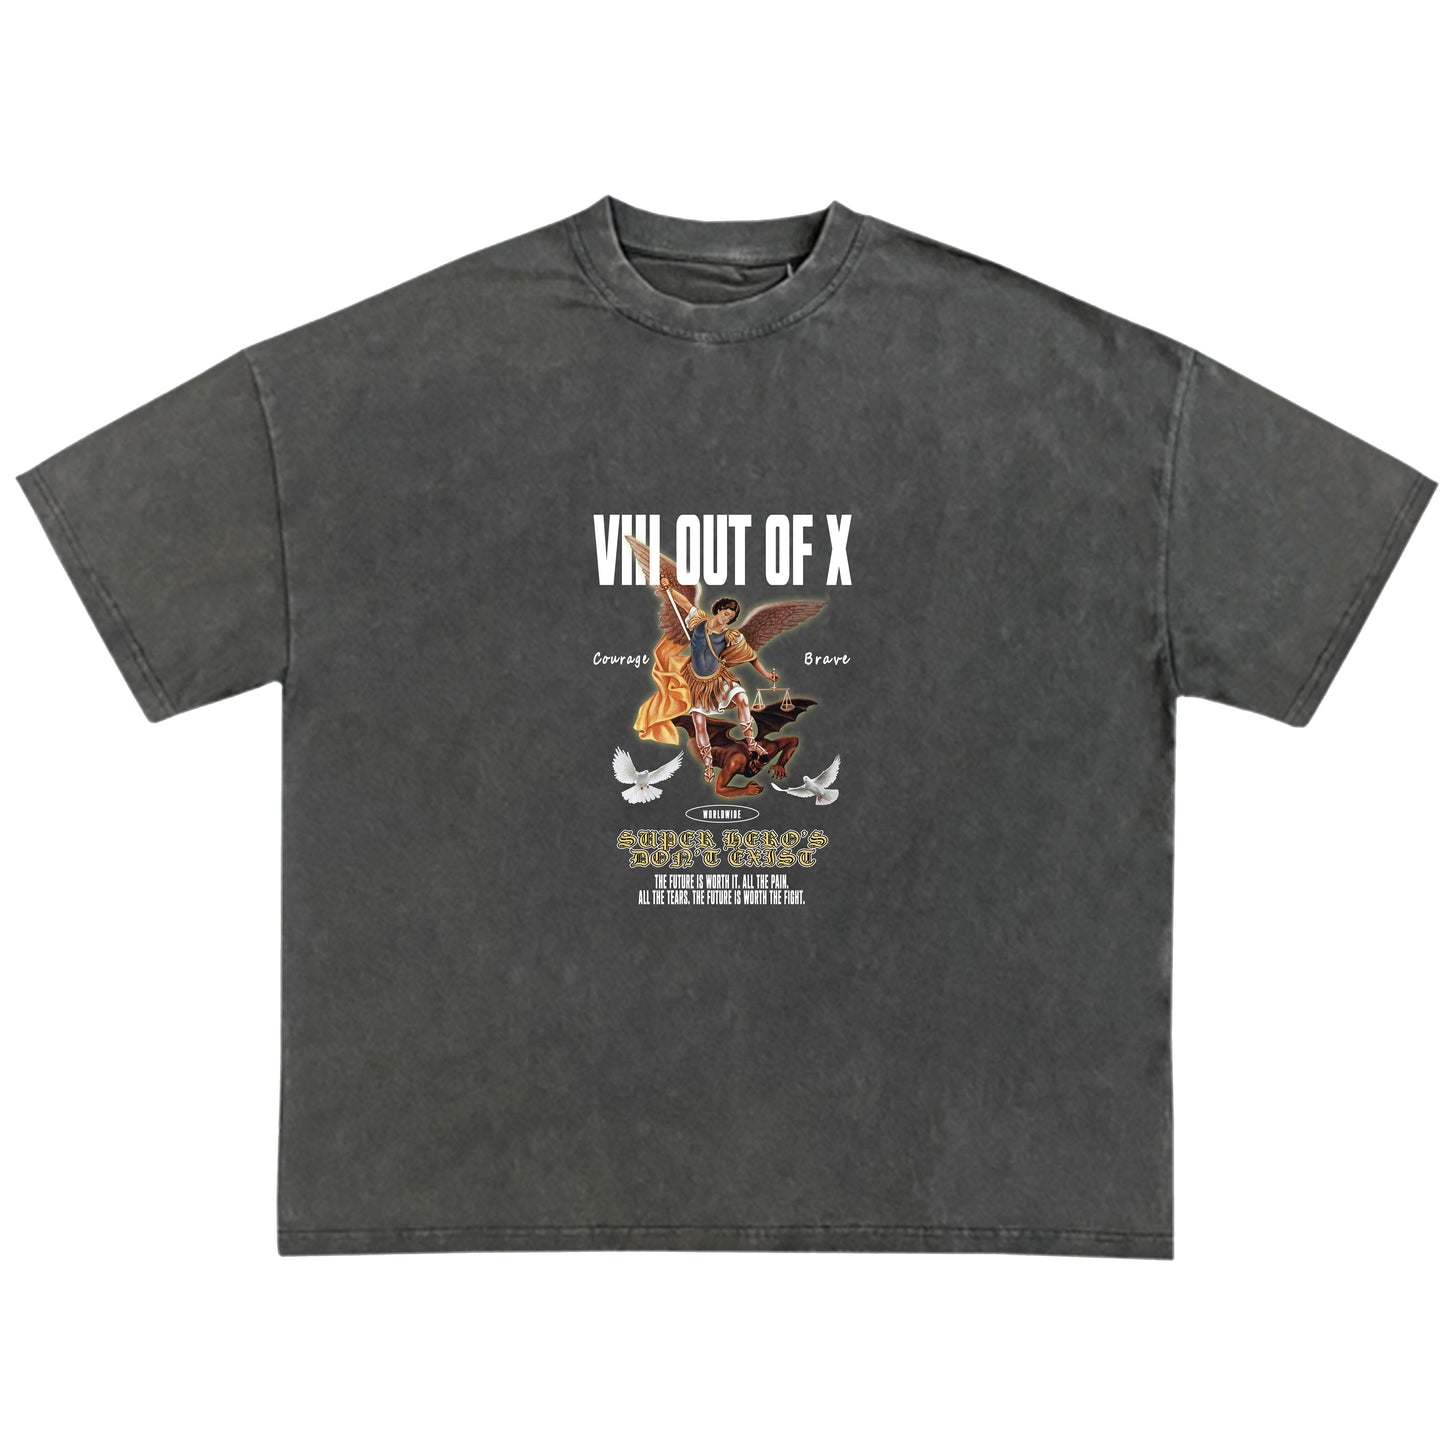 *PRE-ORDER* VIII Out Of X "Super Heros" T-Shirt (Grey)